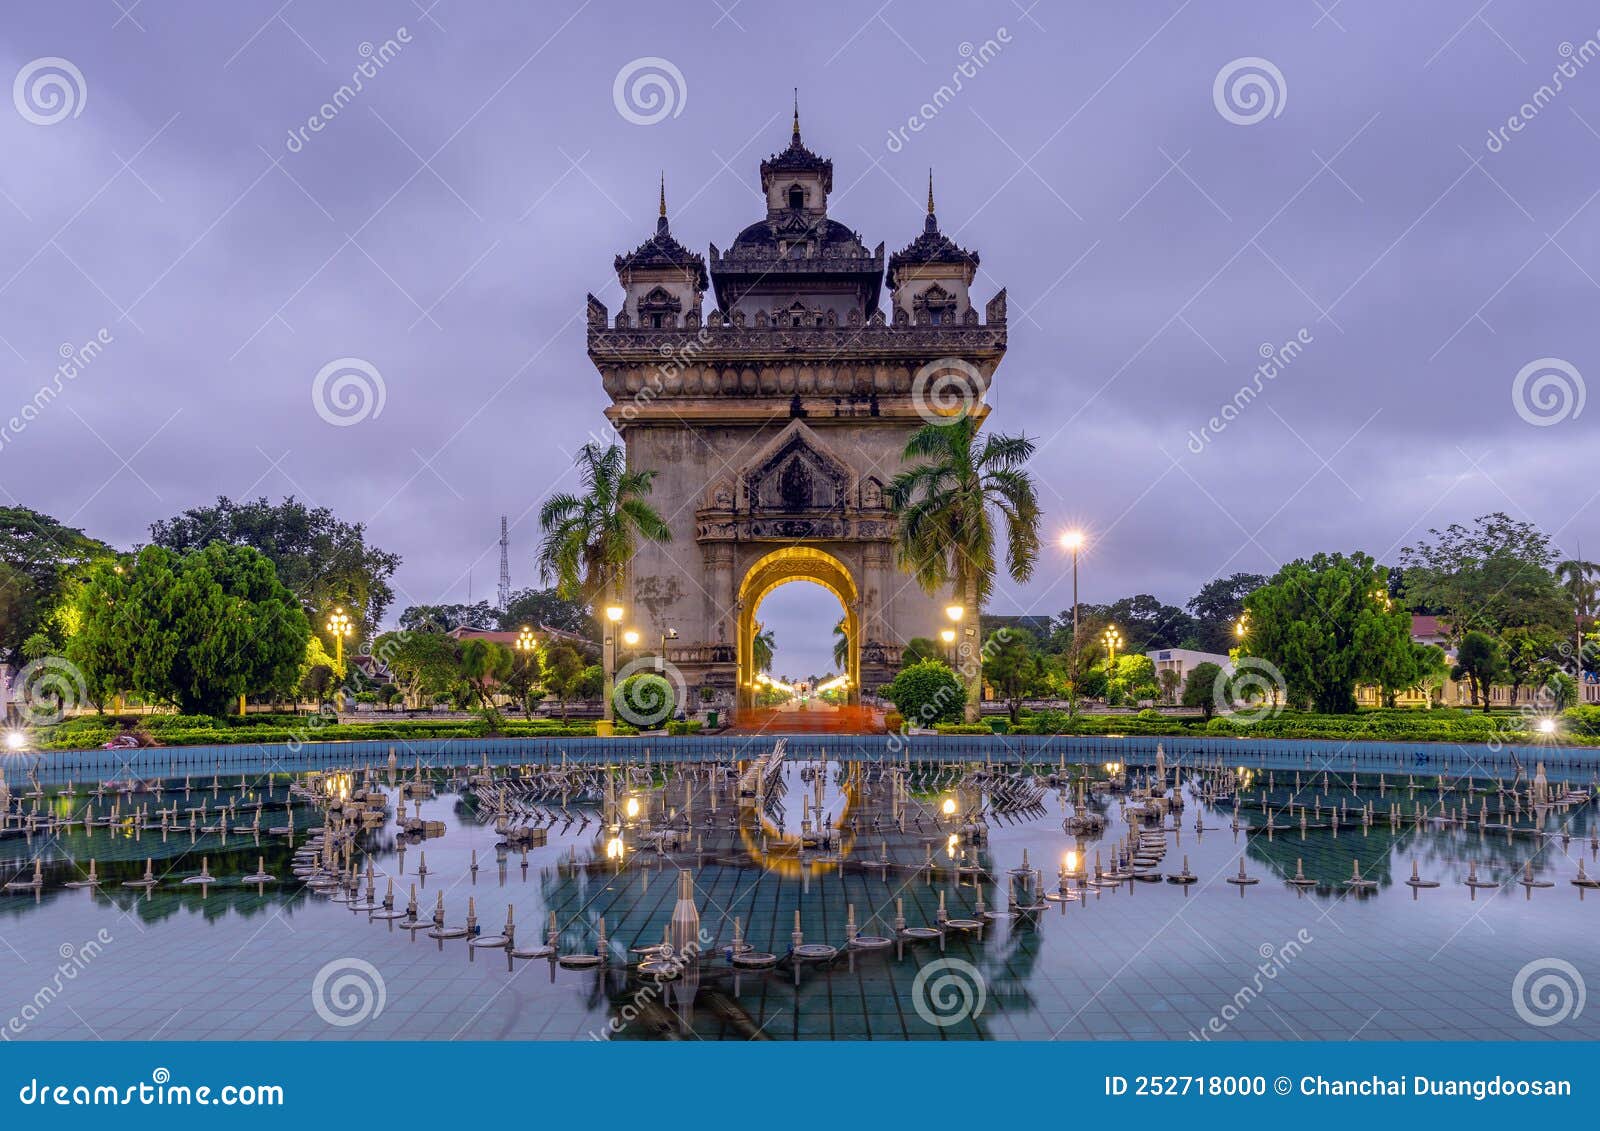 patuxai literally meaning victory gate and sunset in vientiane,laos